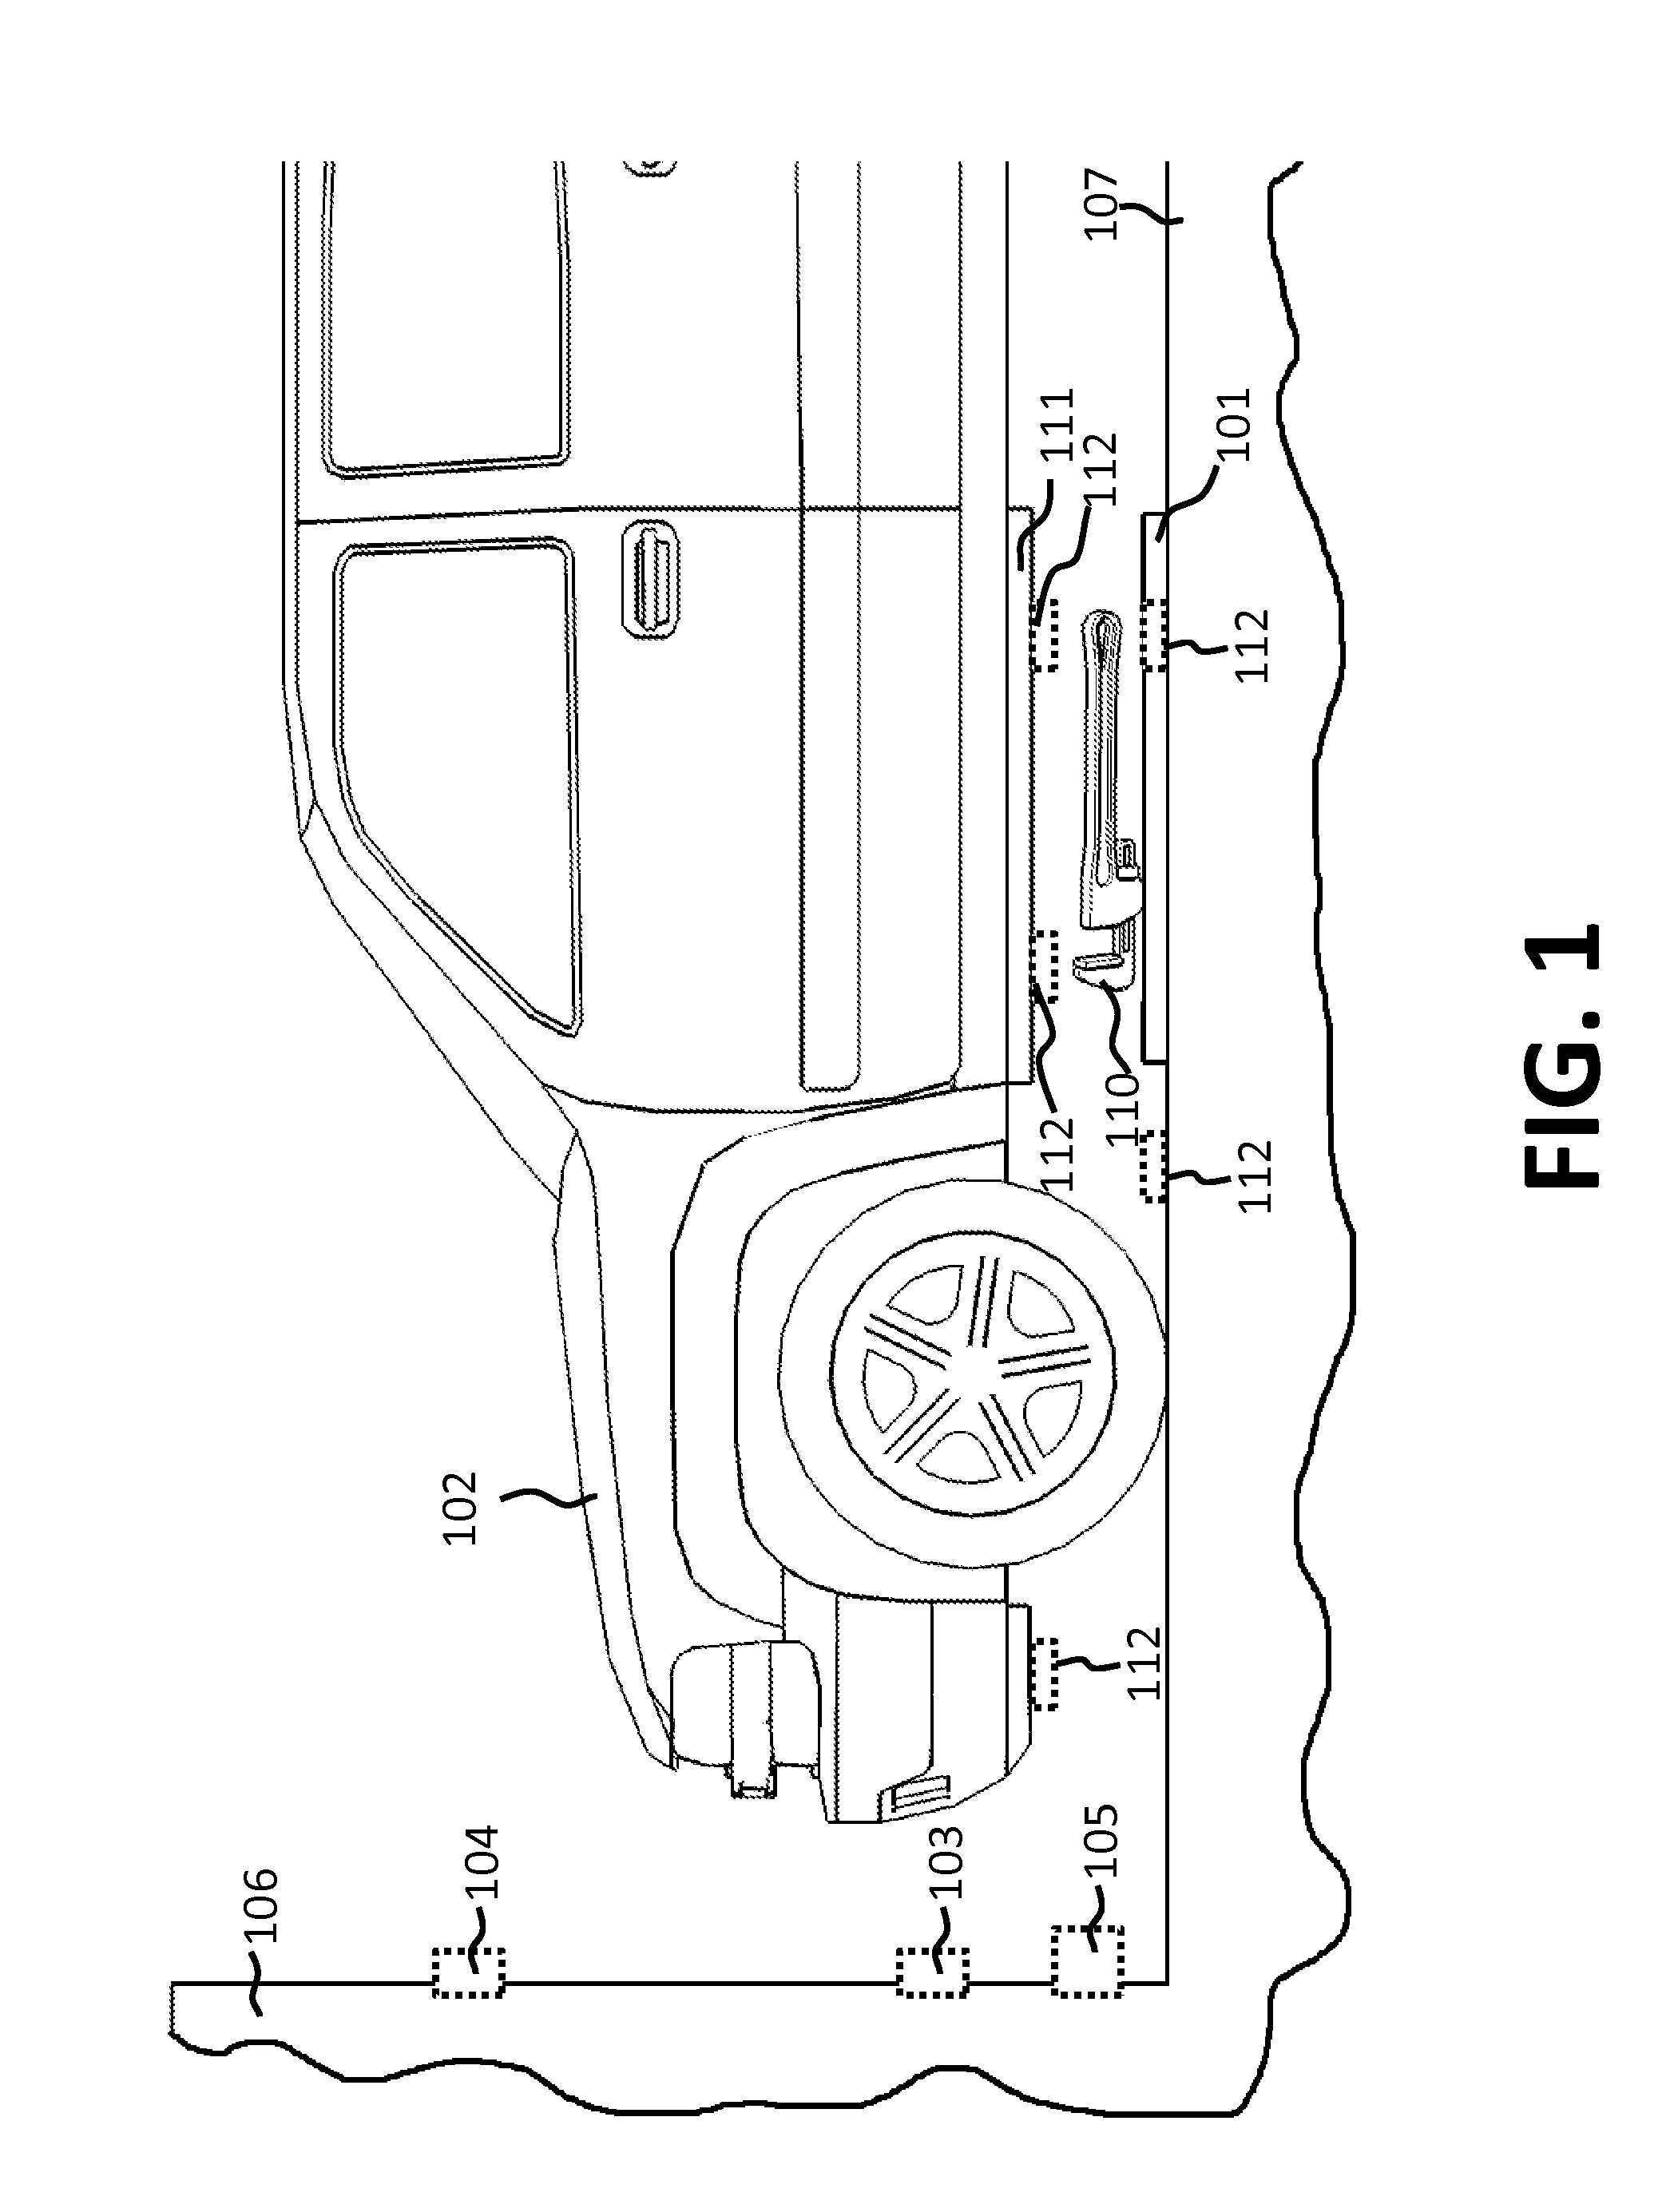 Vehicle charger safety system and method